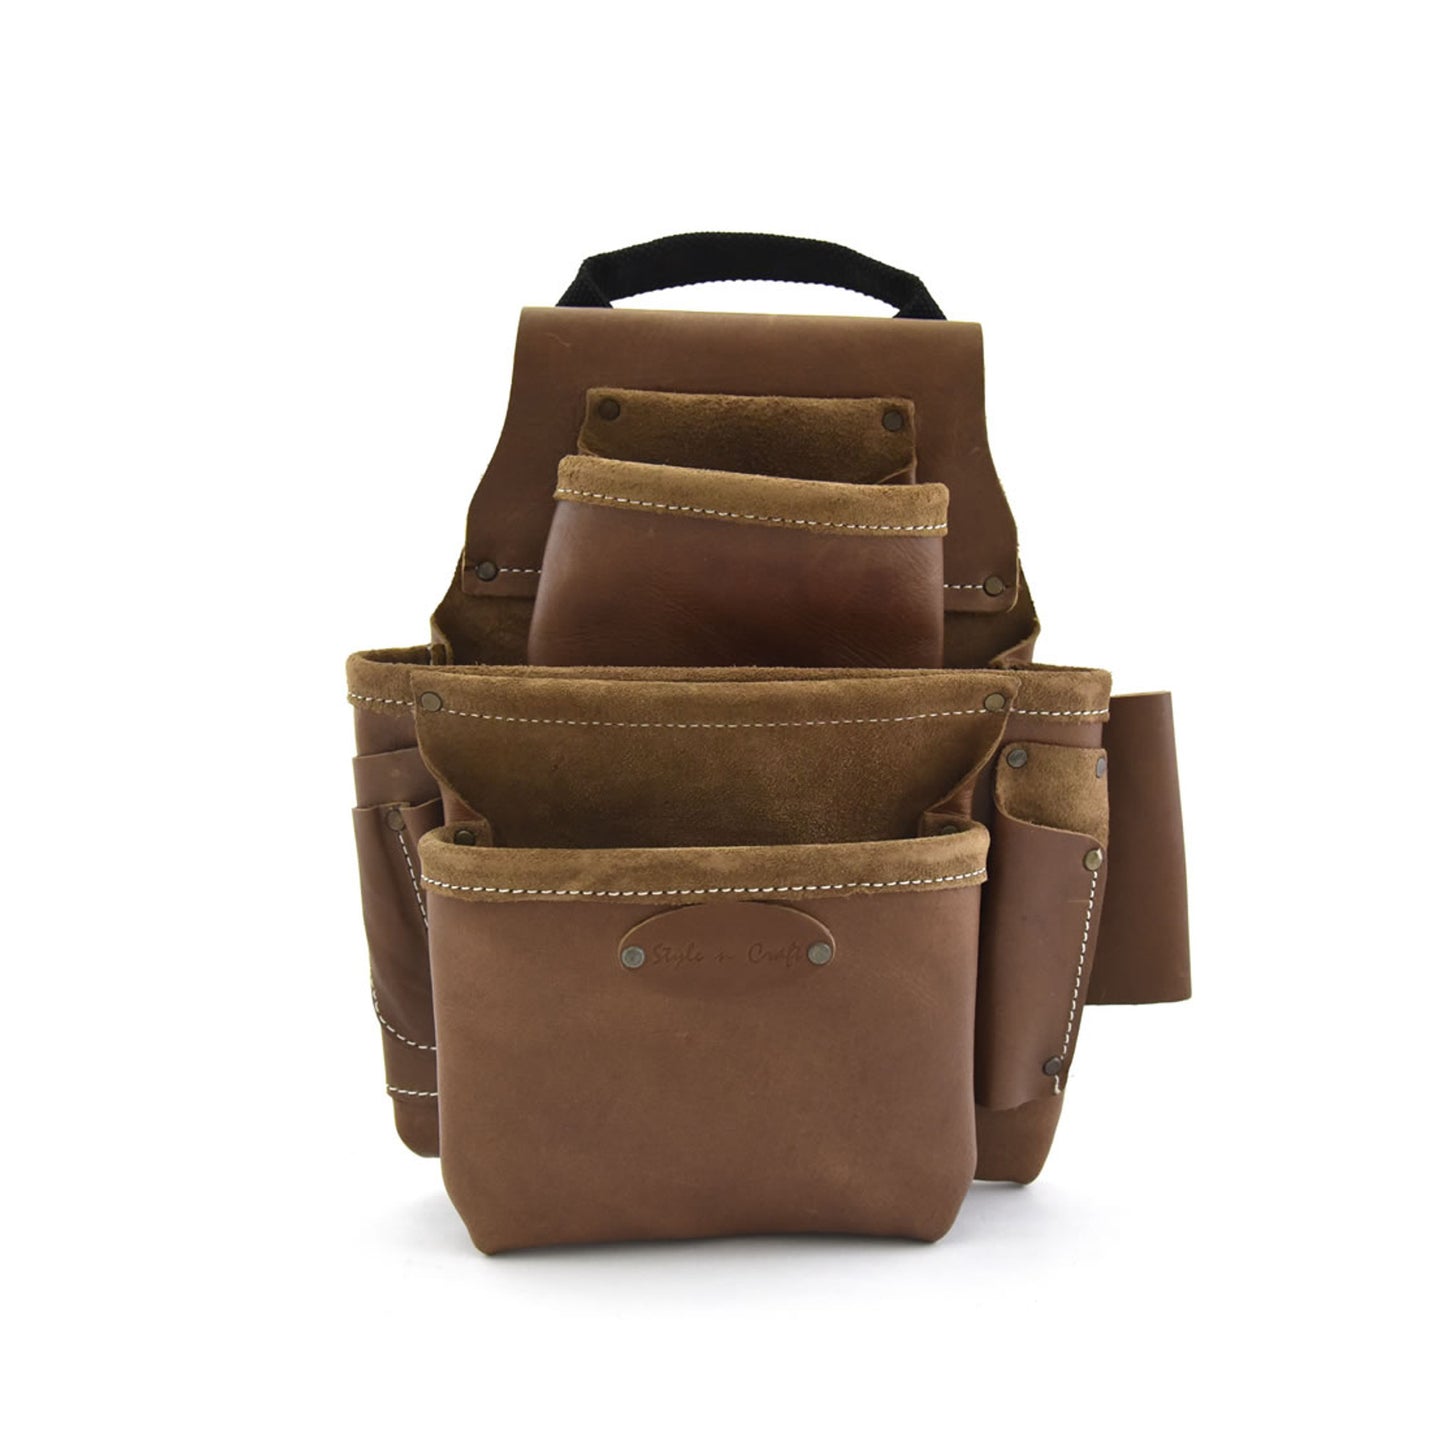 98436 - 8 Pocket Nail and Tool Pouch in Top Grain Leather in Dark Tan Color